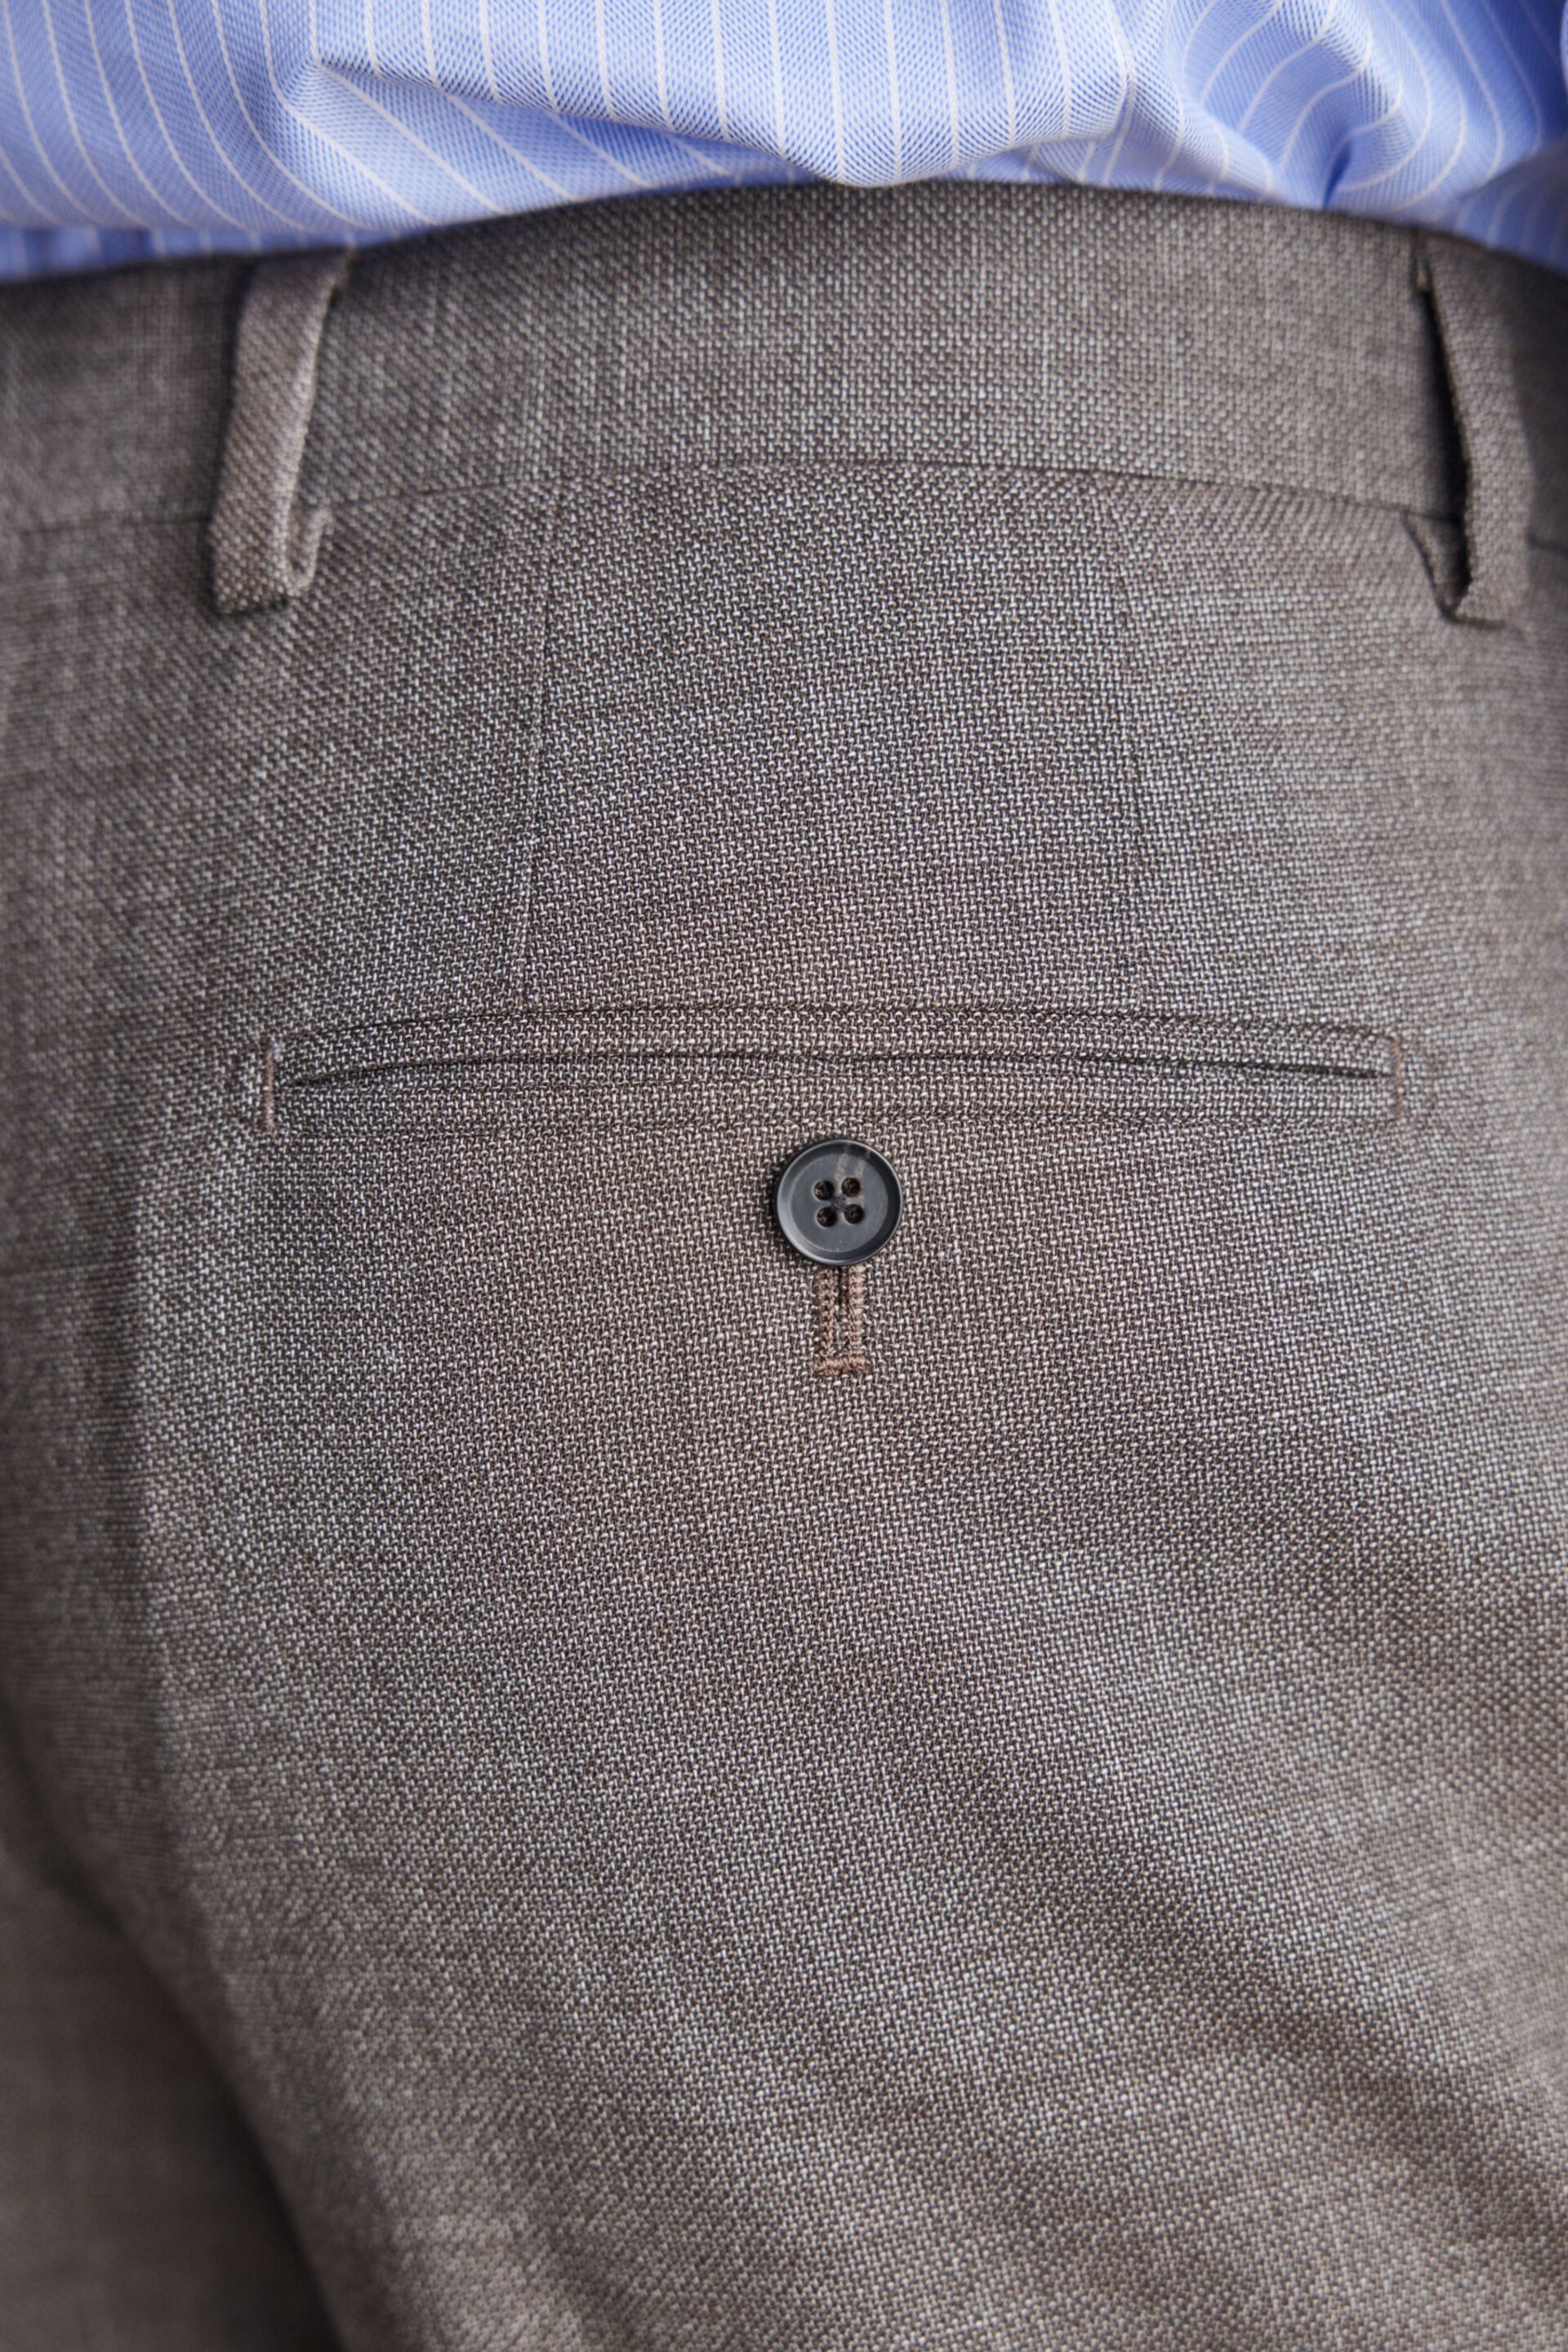 Taupe Slim Fit Signature Marzotto Italian Fabric Textured Suit: Trousers - Image 5 of 7